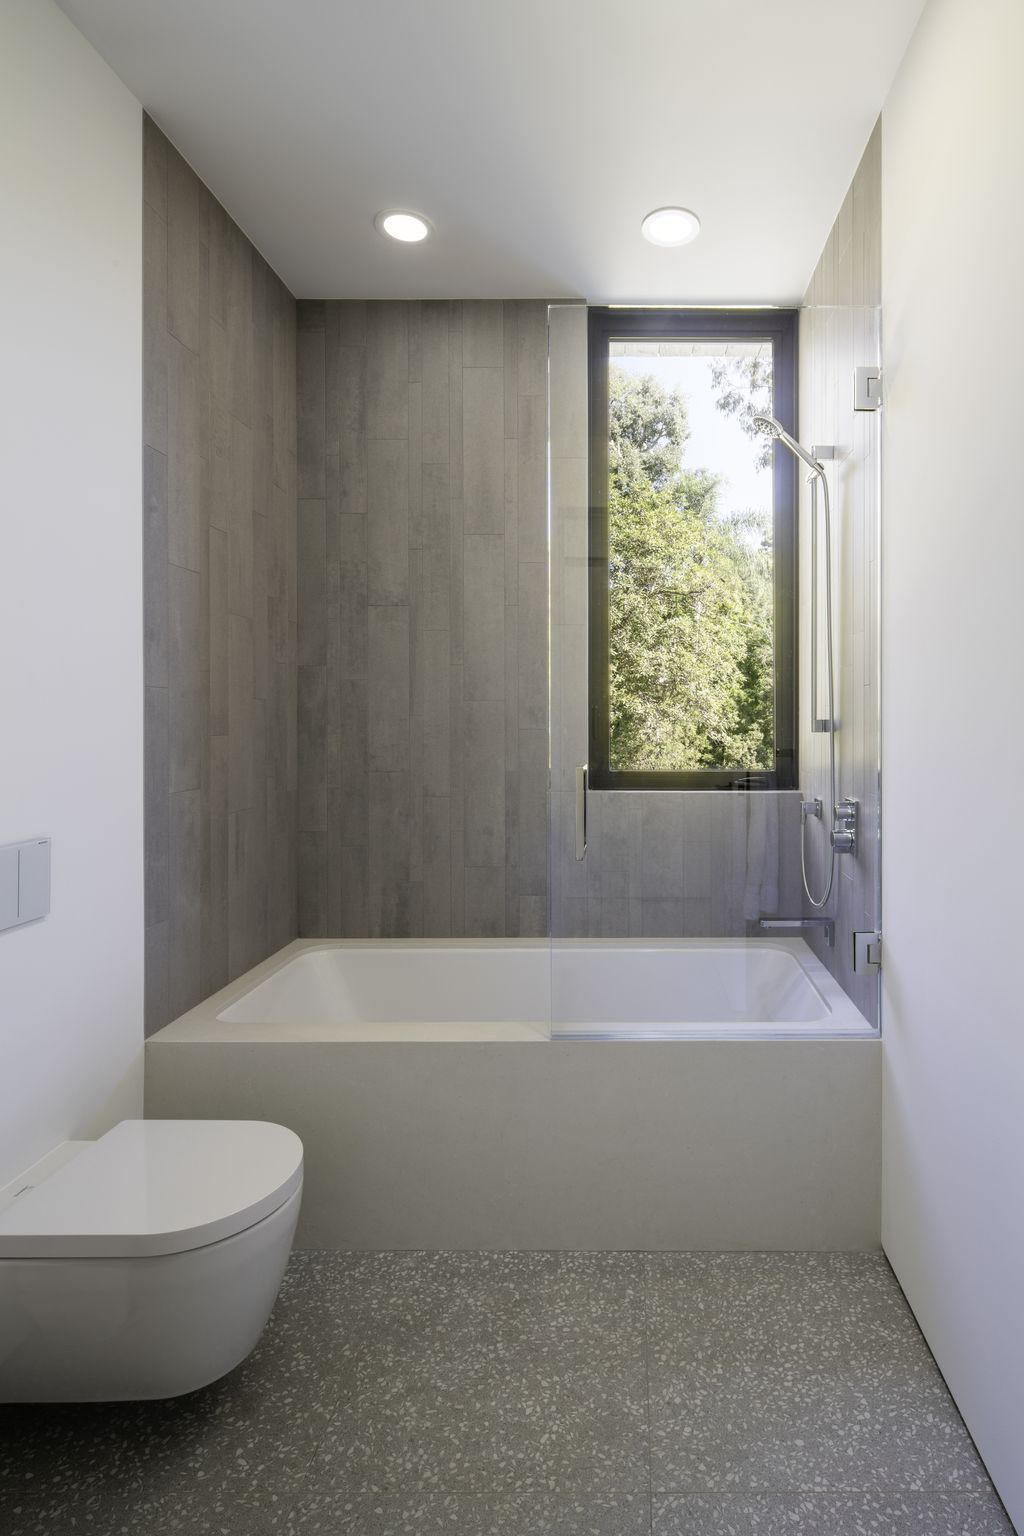 If you're looking to create a serene and calming bathroom, consider minimalist gray bathroom ideas. Gray is a timeless and versatile color that can be paired with a variety of other colors to create a unique and sophisticated look. A minimalist approach to gray bathroom design involves incorporating simple and sleek fixtures, such as a floating vanity, a frameless shower door, and minimalist lighting. To add texture and interest, consider using gray tiles with different finishes, such as matte and glossy